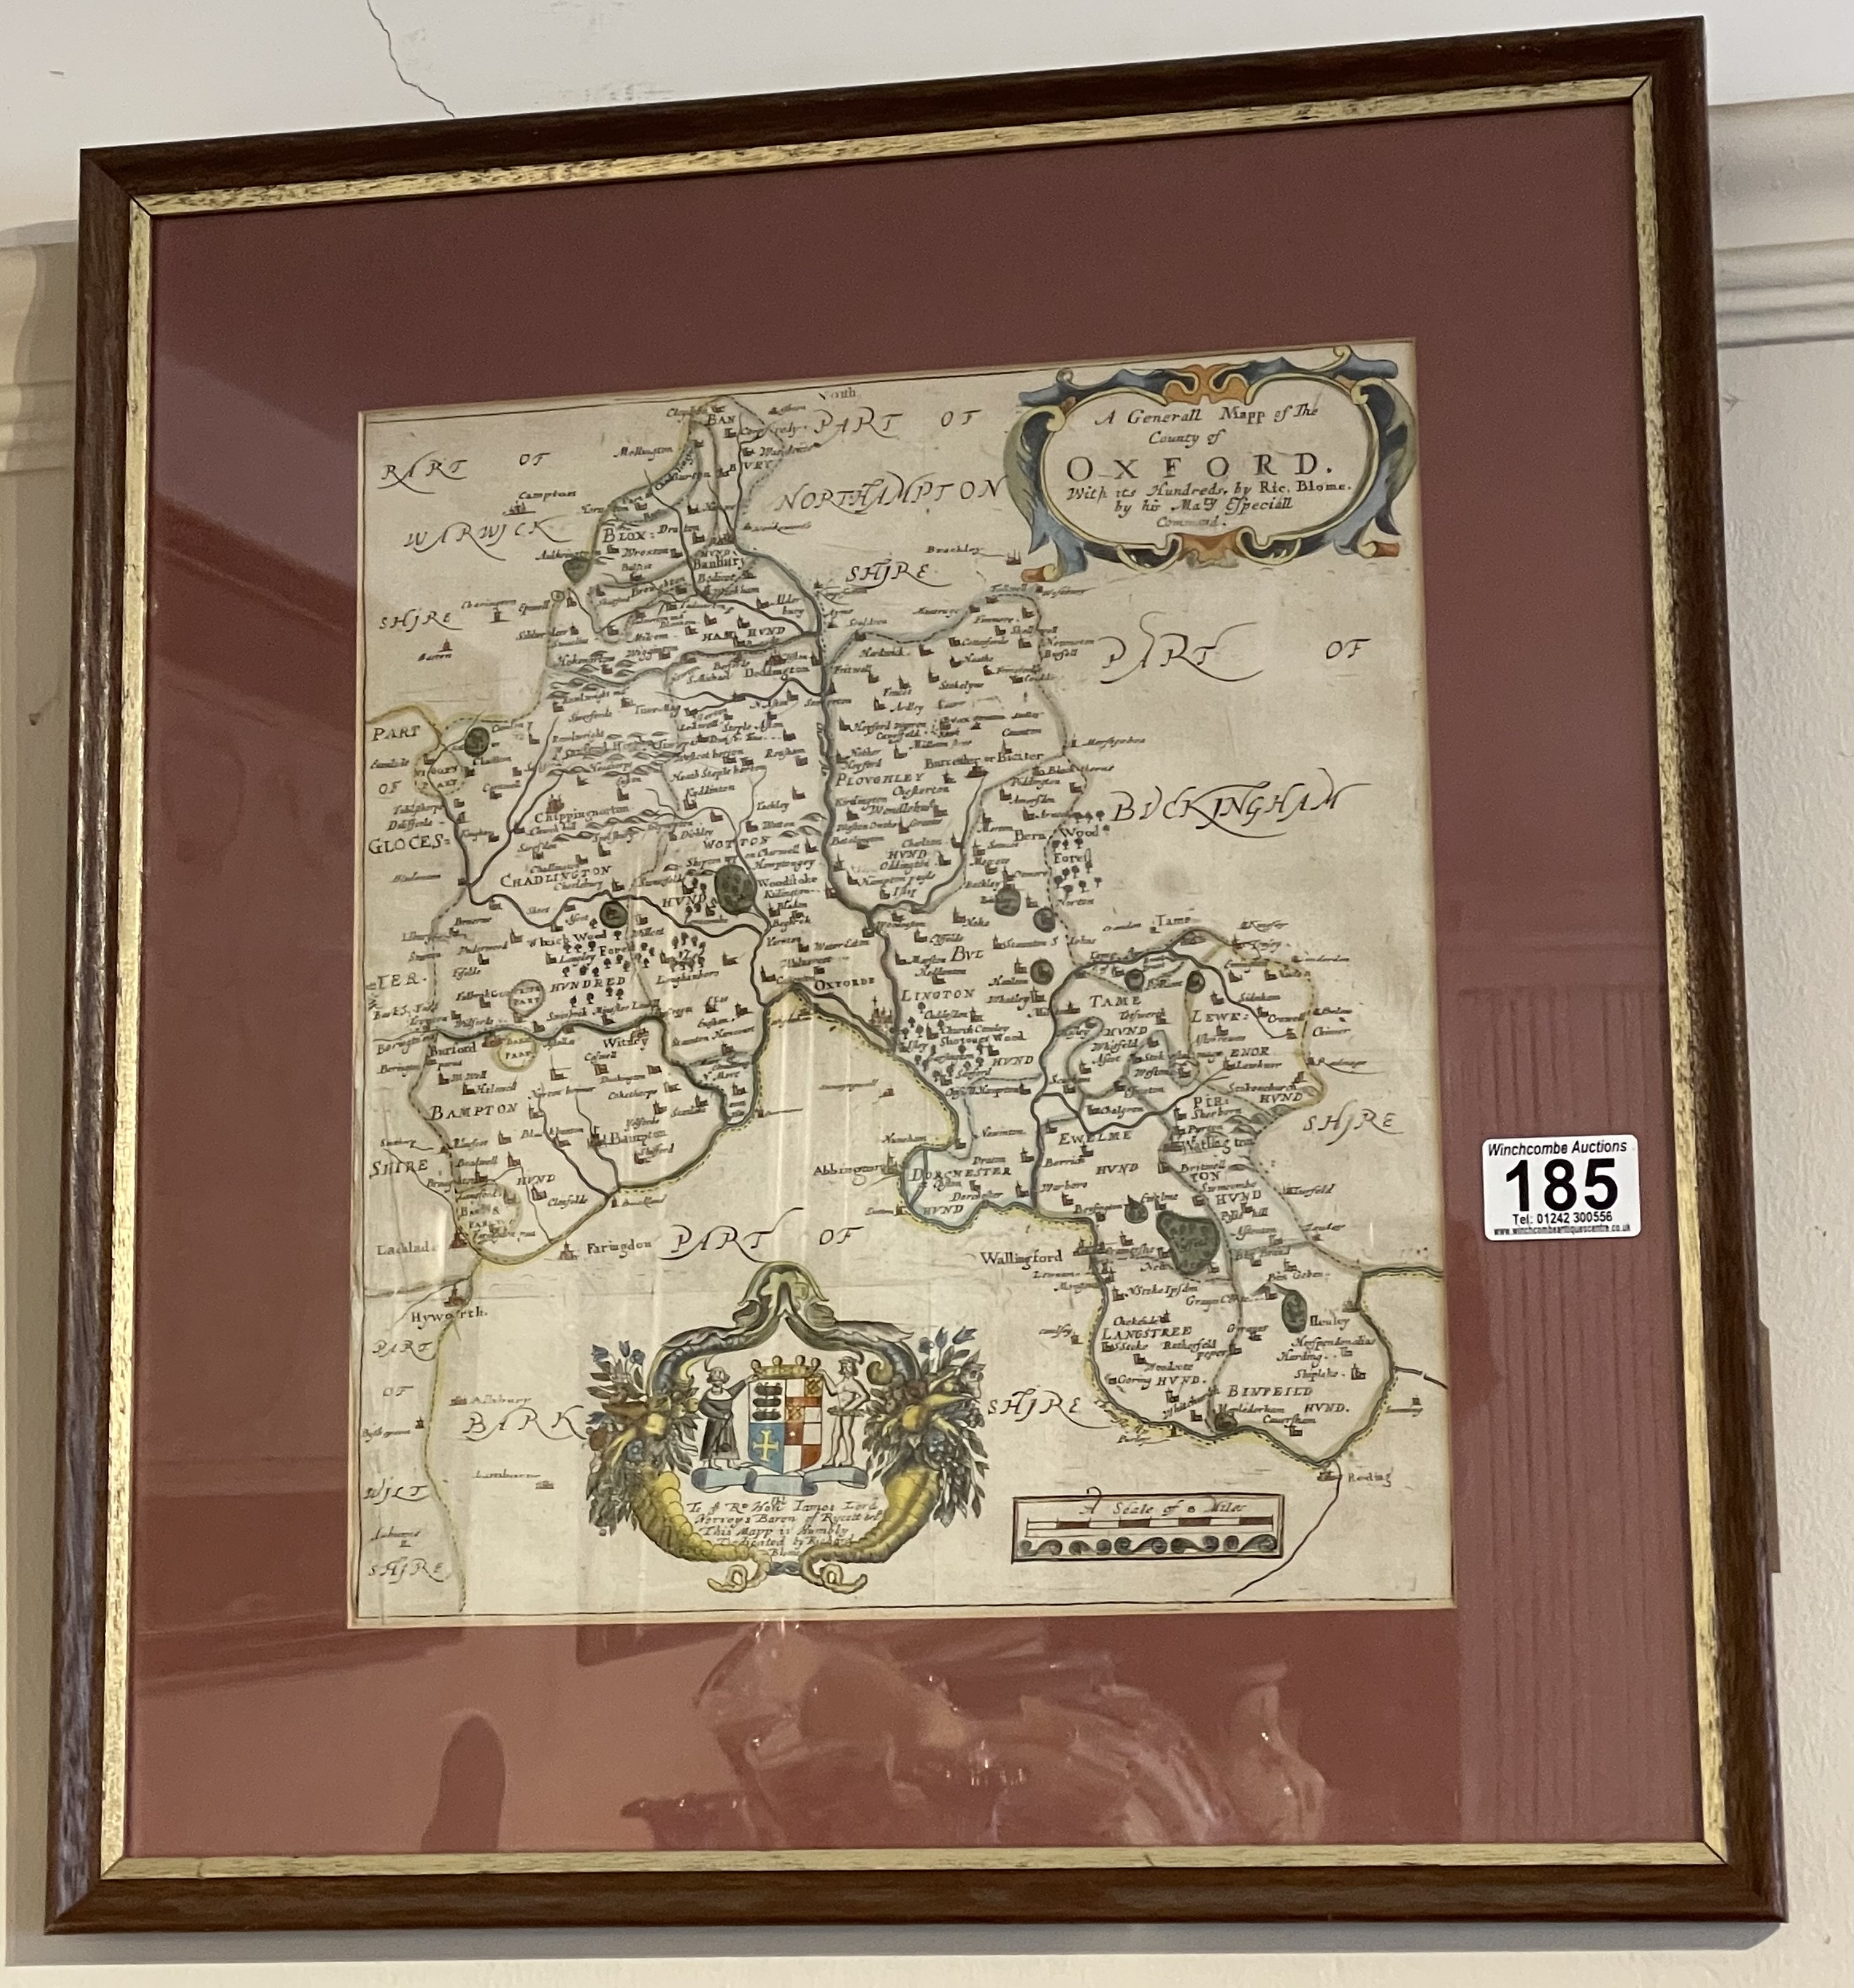 Early Map Of Oxfordshire By Richard Blome (1660 - 1705)